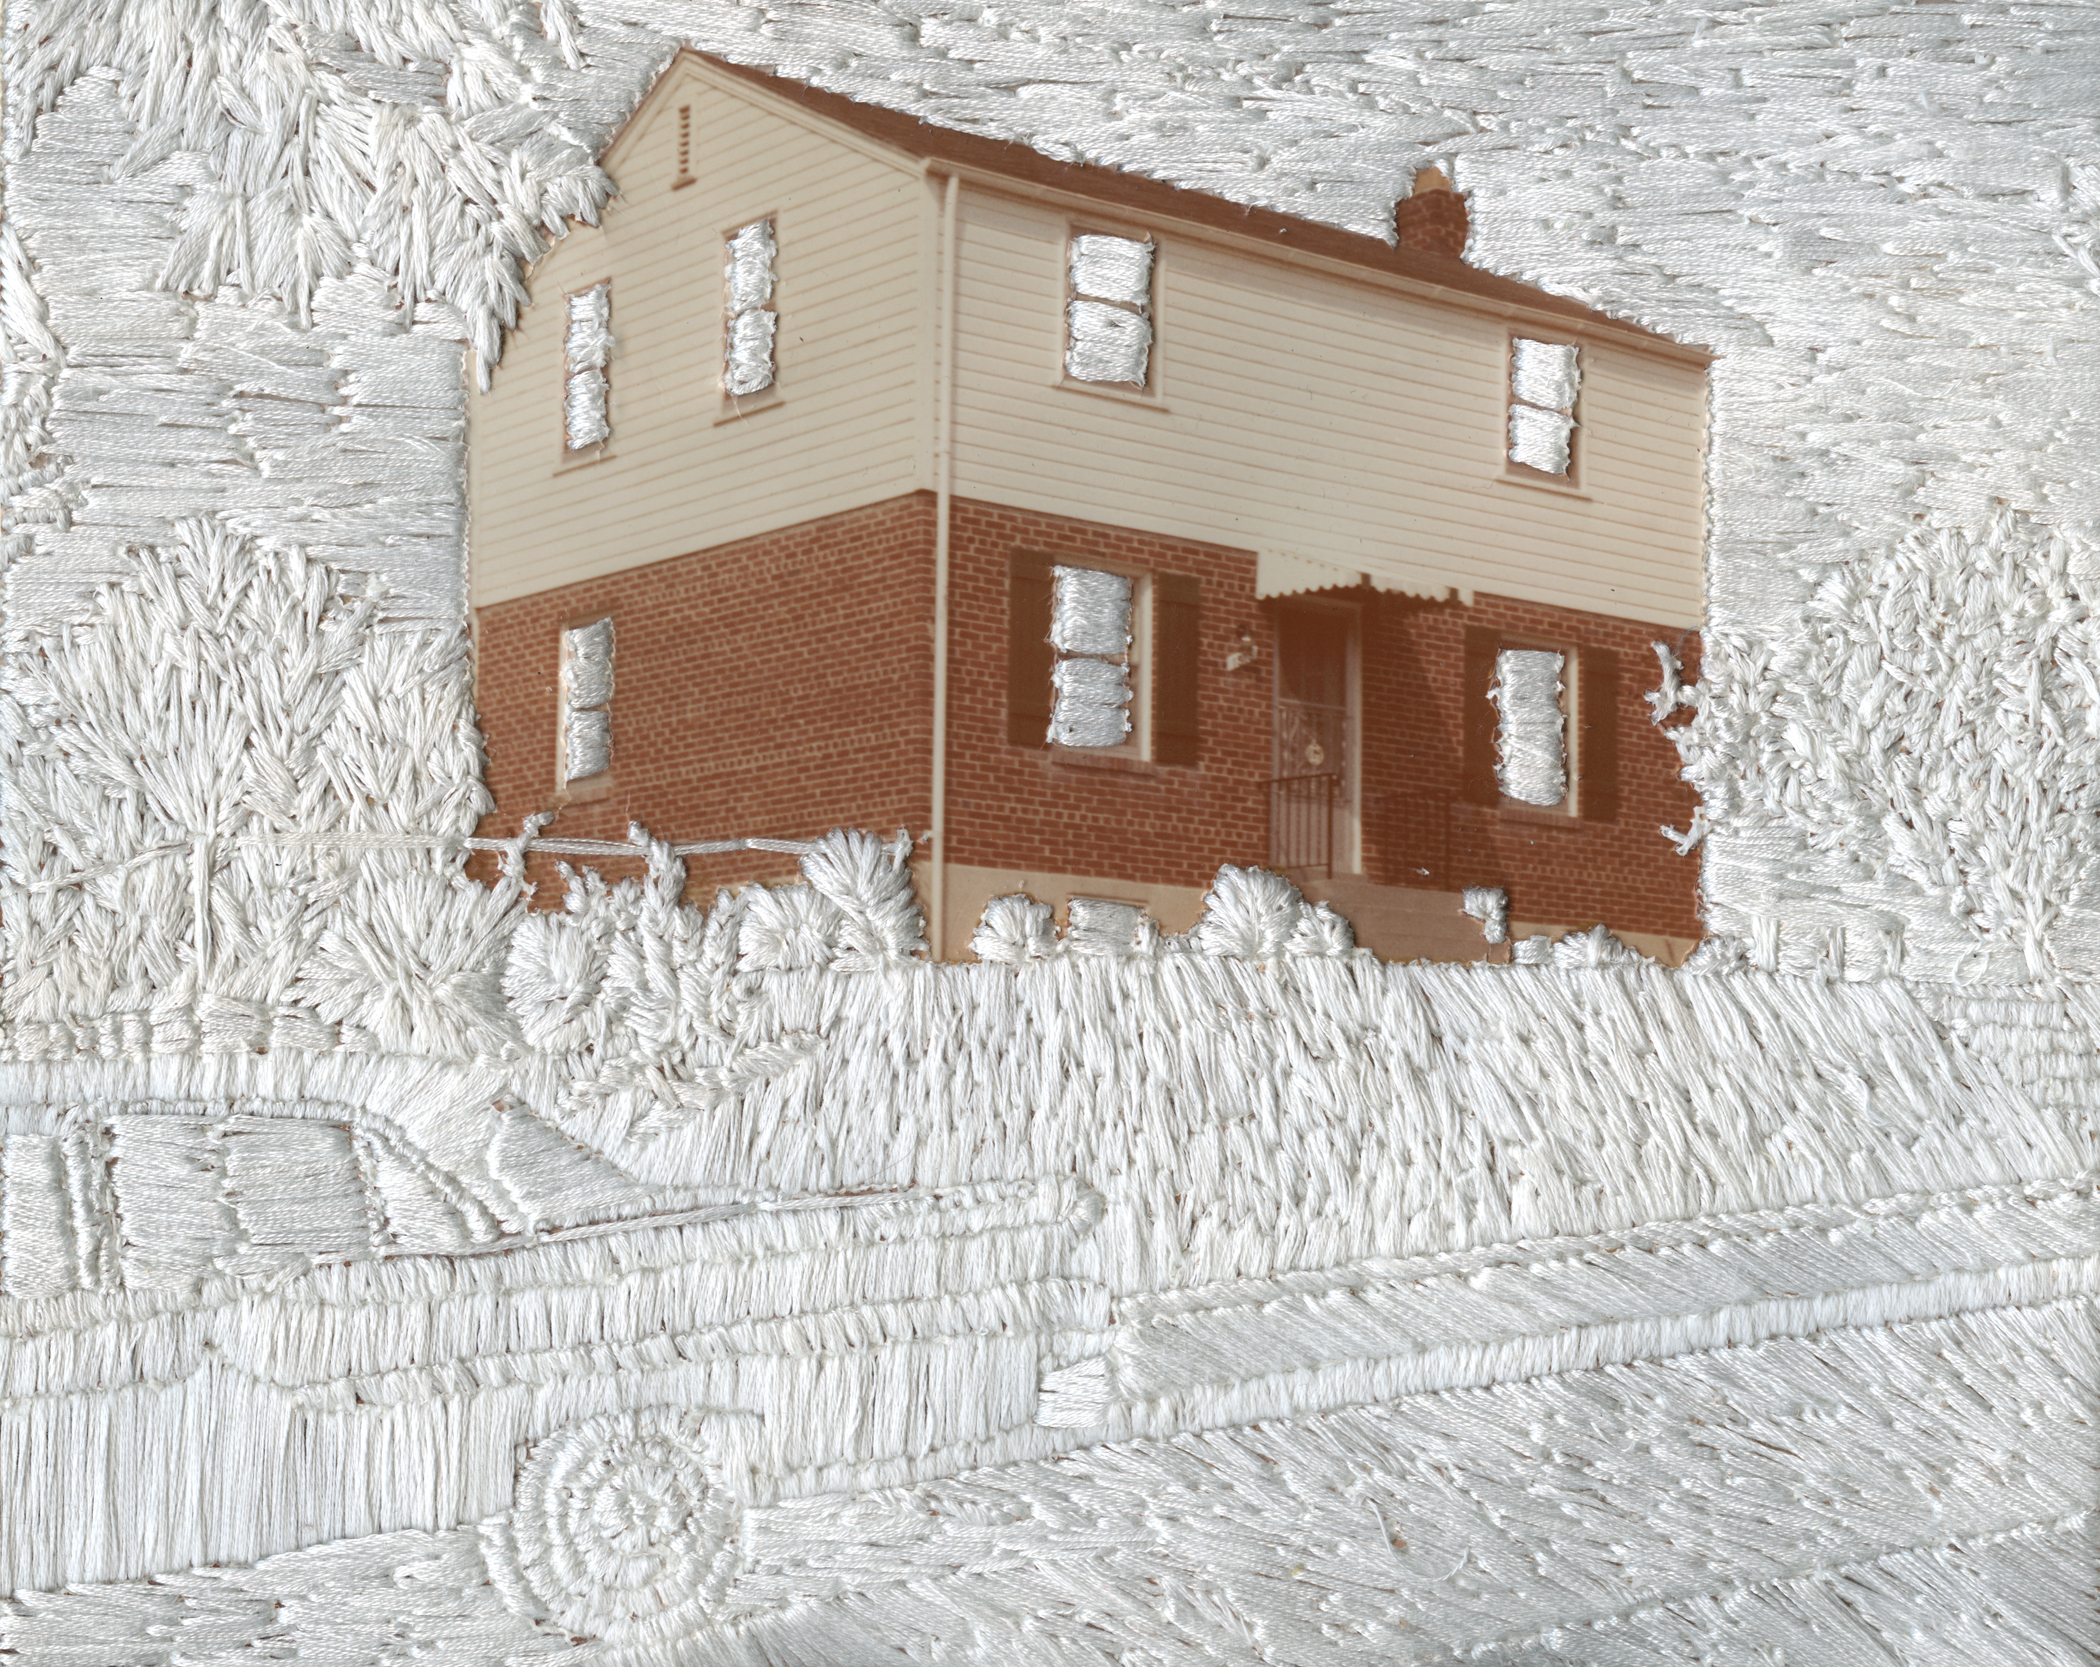 Jessica Wohl, House on a Hill